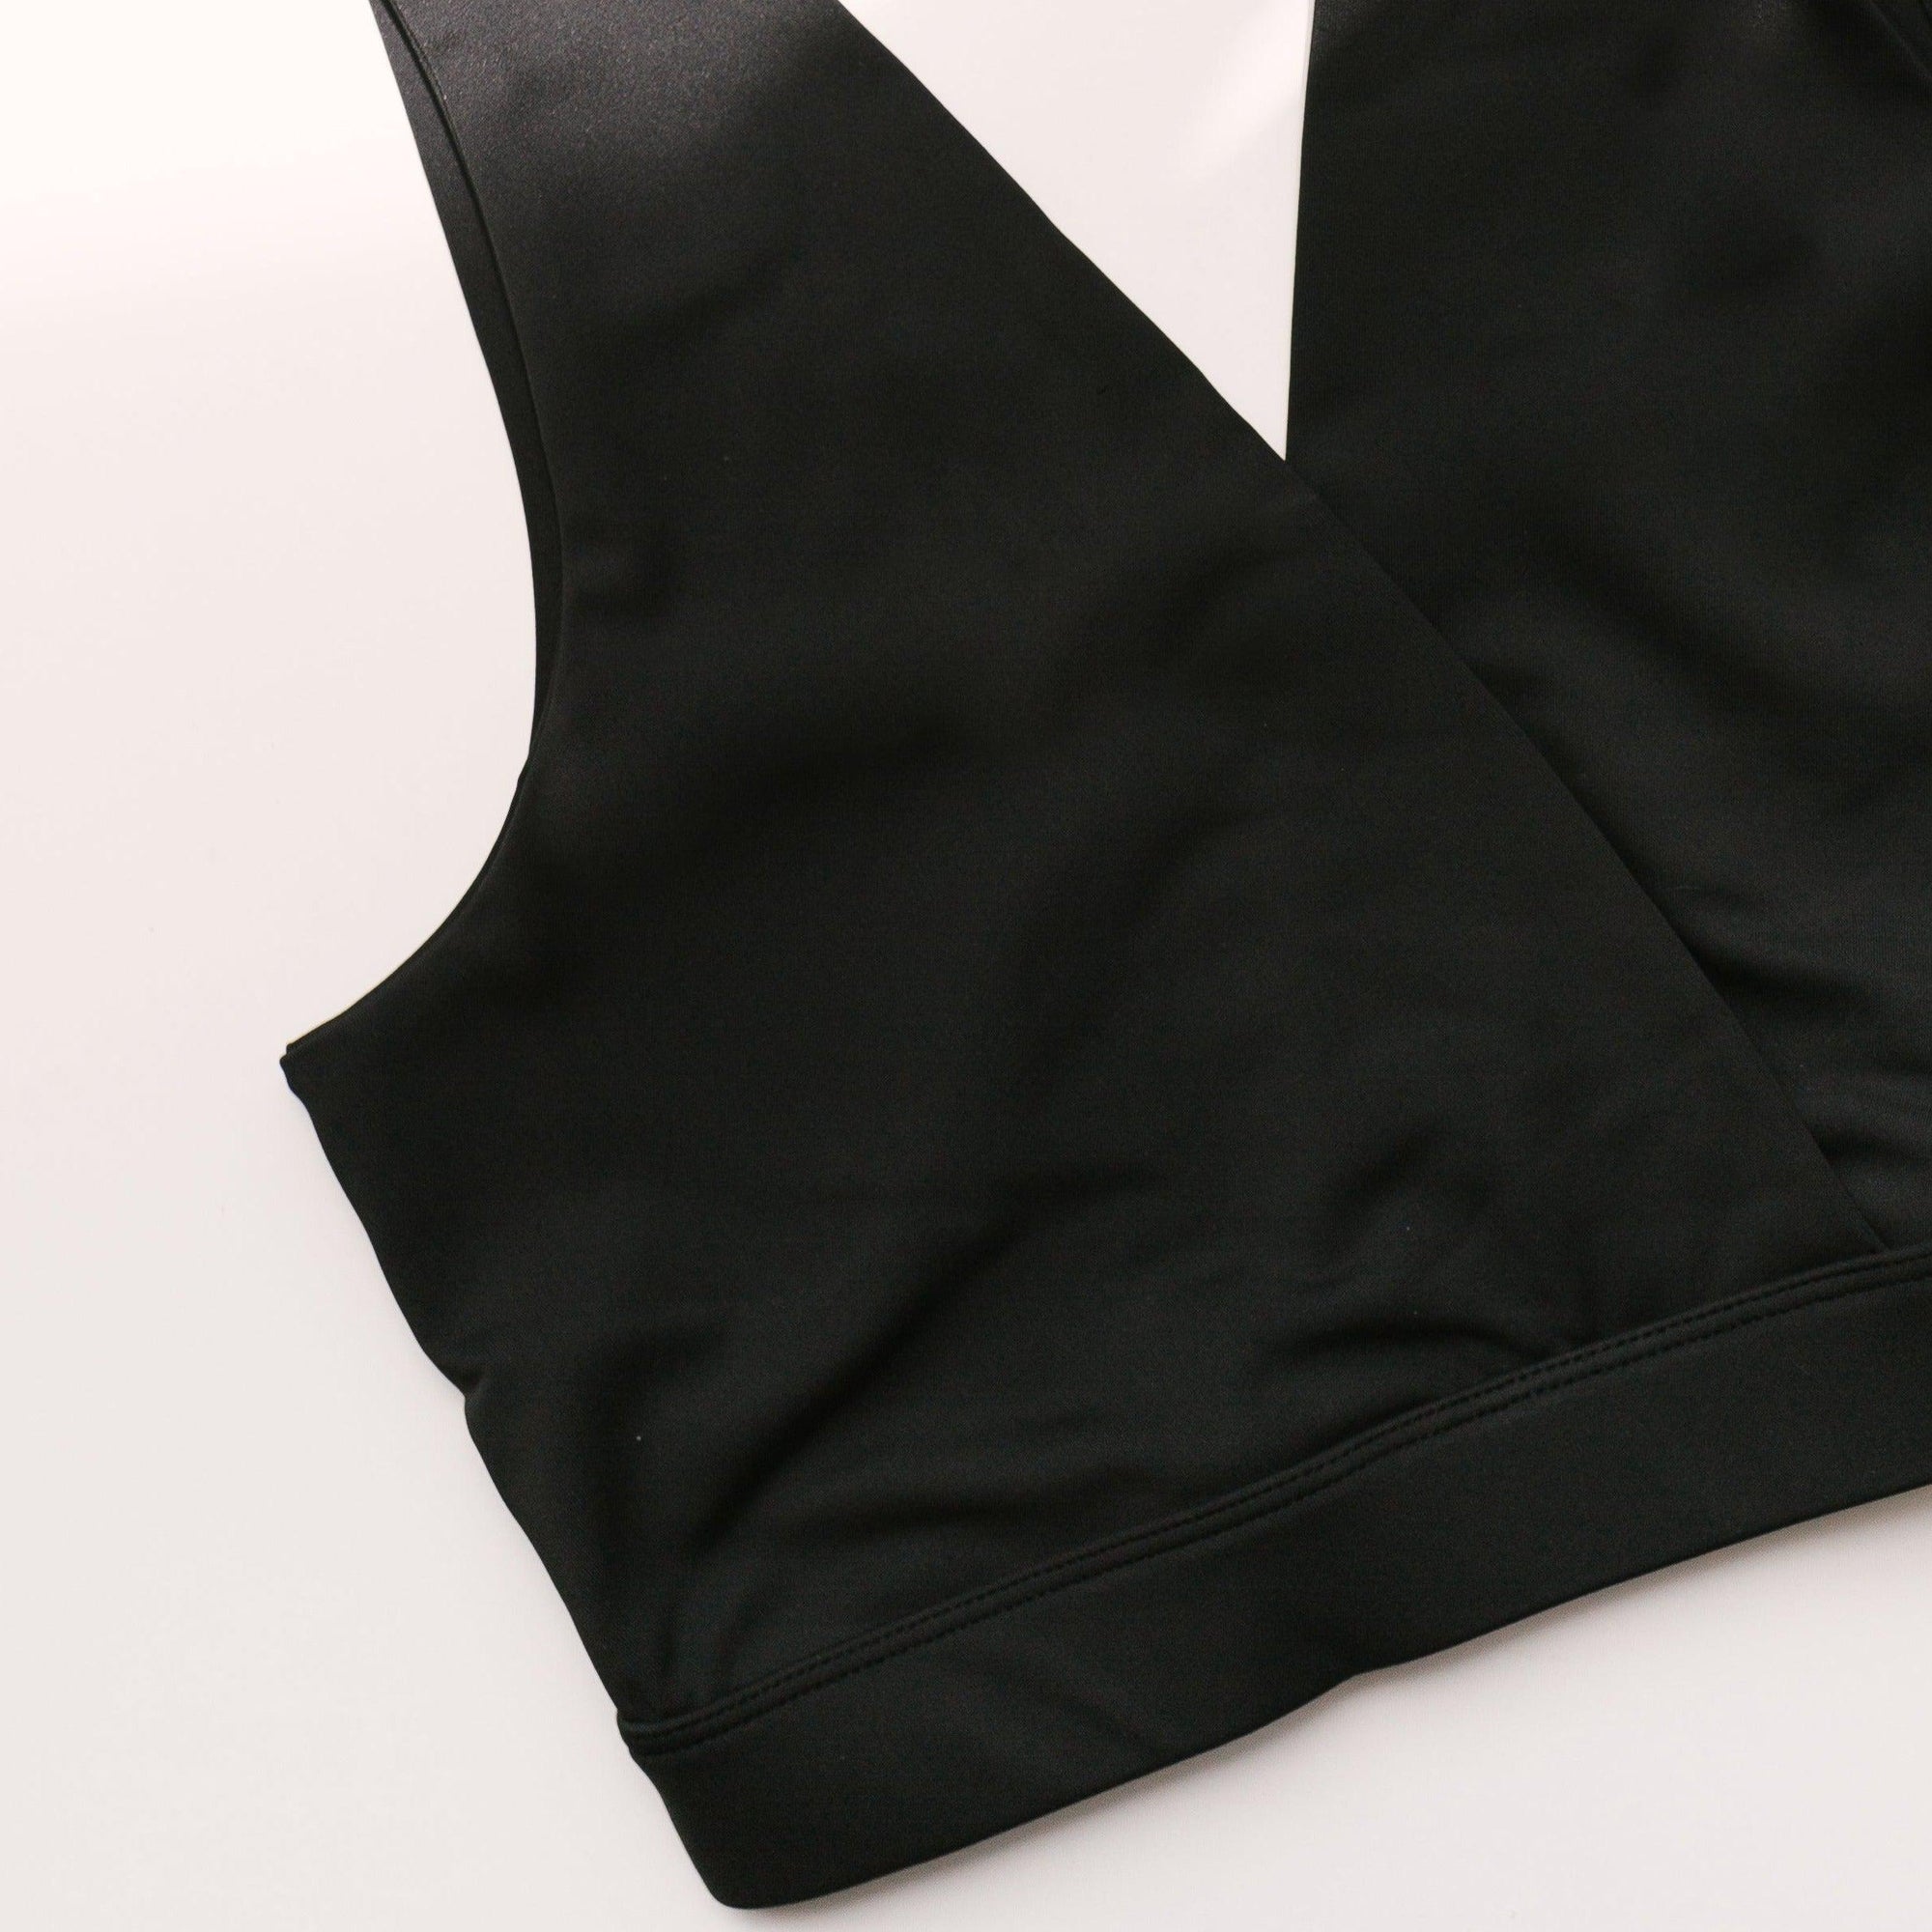 A black Postpartum Bralette on a white surface, designed for breastfeeding mothers.